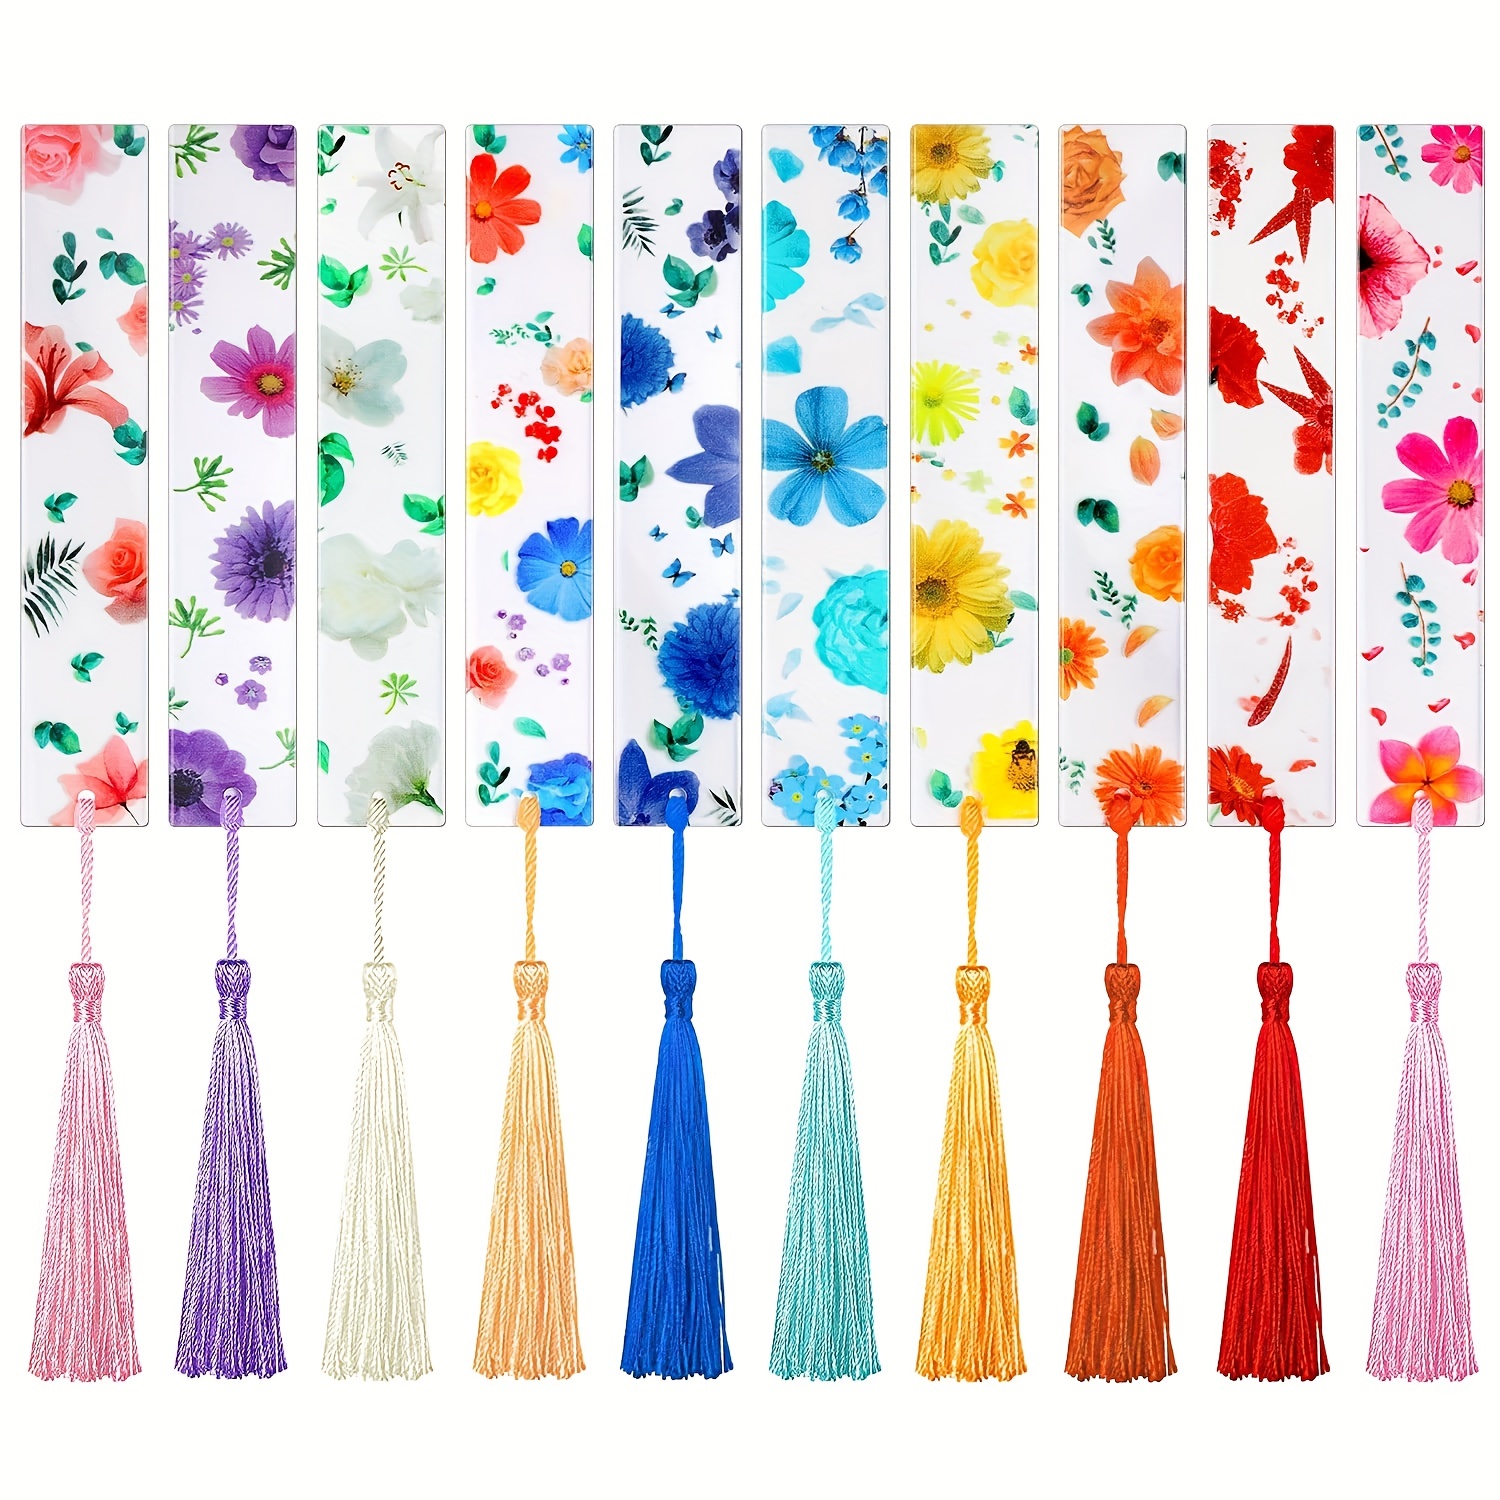 

10pcs Flower Resin Bookmark Transparent Floral Bookmarks For Women Cute Bookmarks Flower Page Marker With Tassels, Christmas Gifts Stocking Stuffers For Women